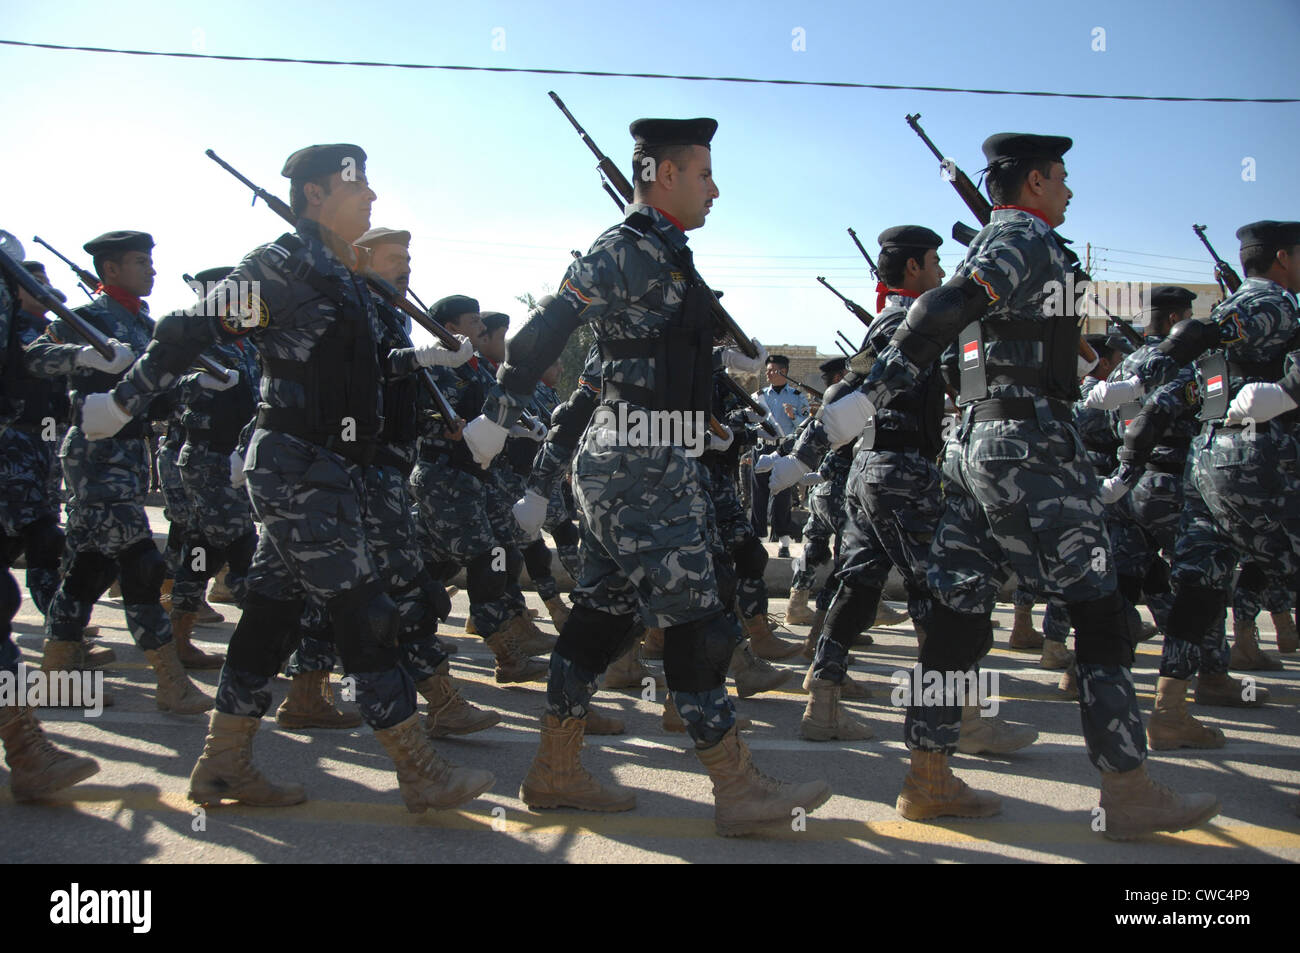 Iraqi police officers march during a parade in their honor near the in Nasiriyah Iraq. Jan. 9 2010. (BSLOC 2011 12 150) Stock Photo